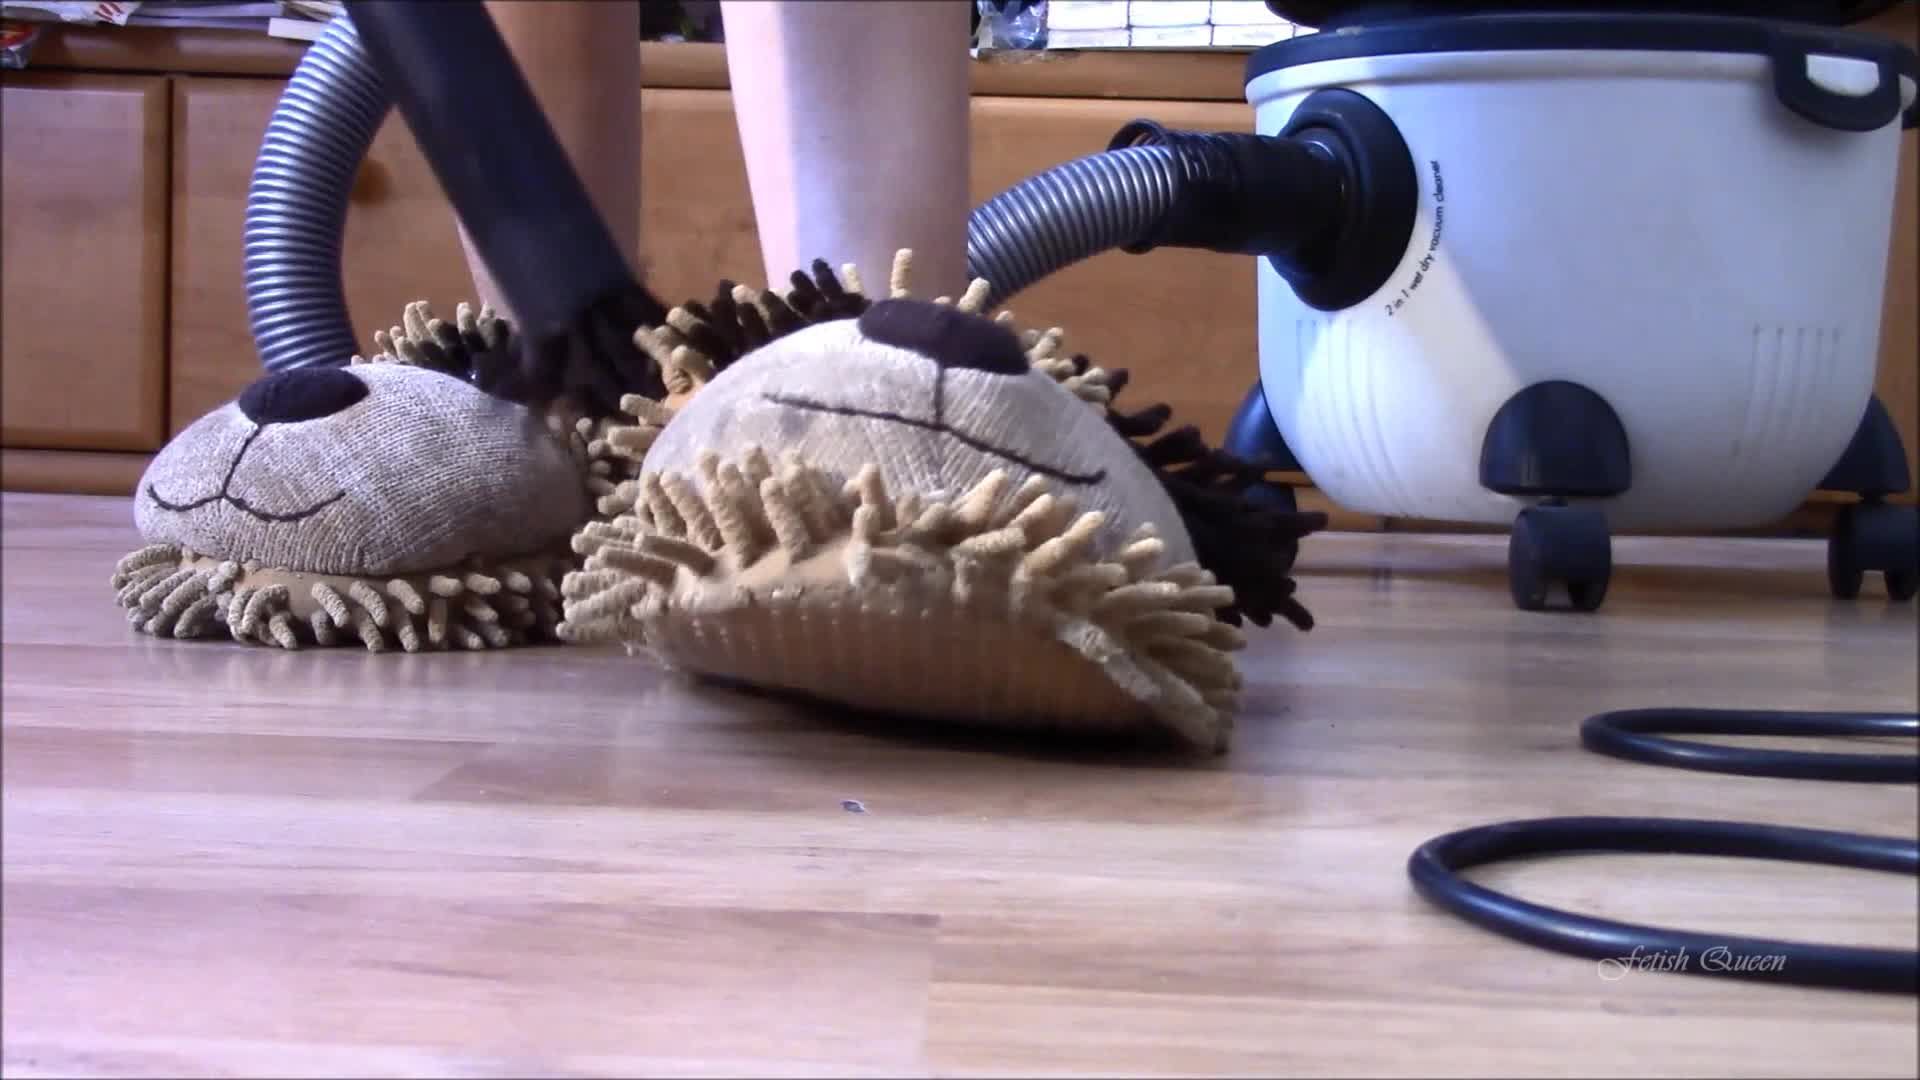 Vacuuming in my slippers